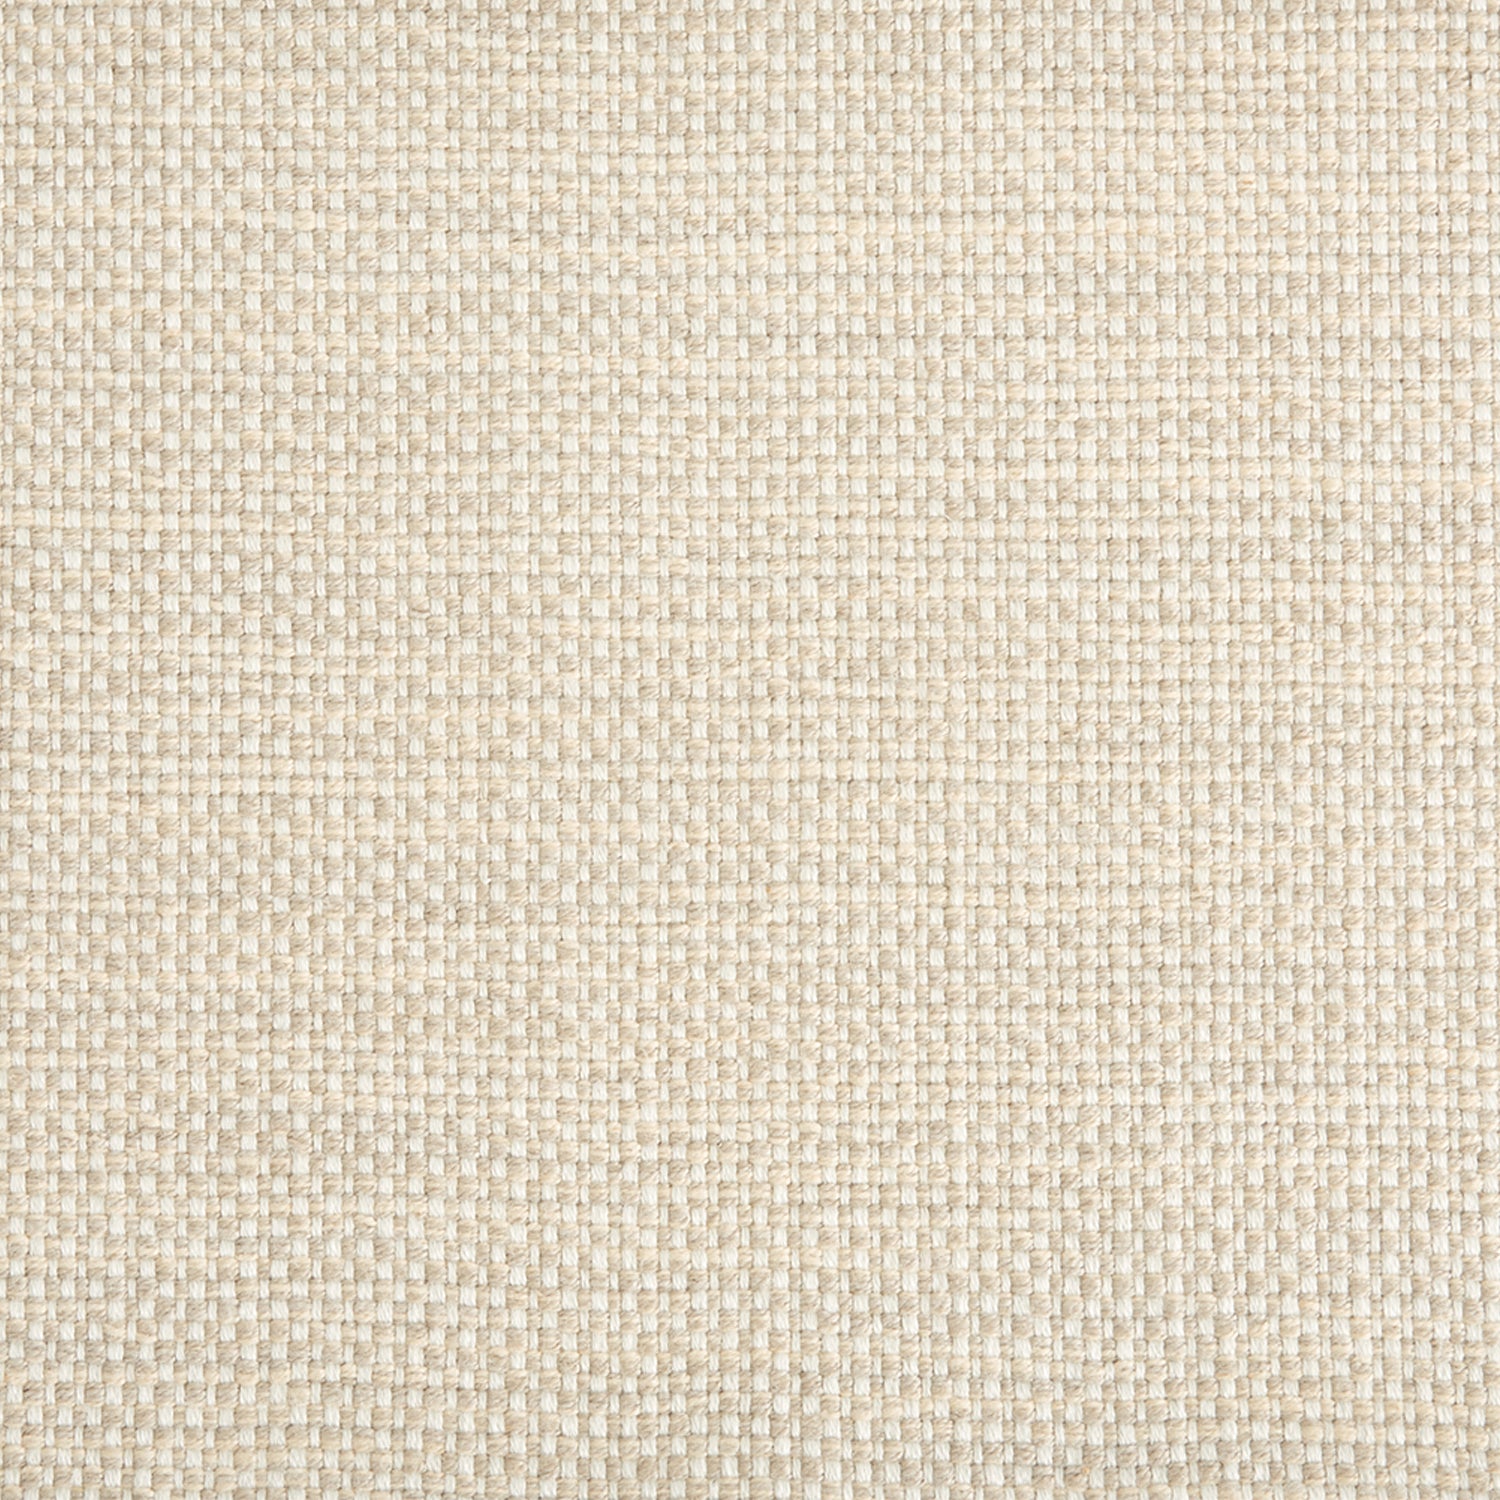 Outdoor broadloom carpet swatch in a chunky grid weave in mottled white and cream.